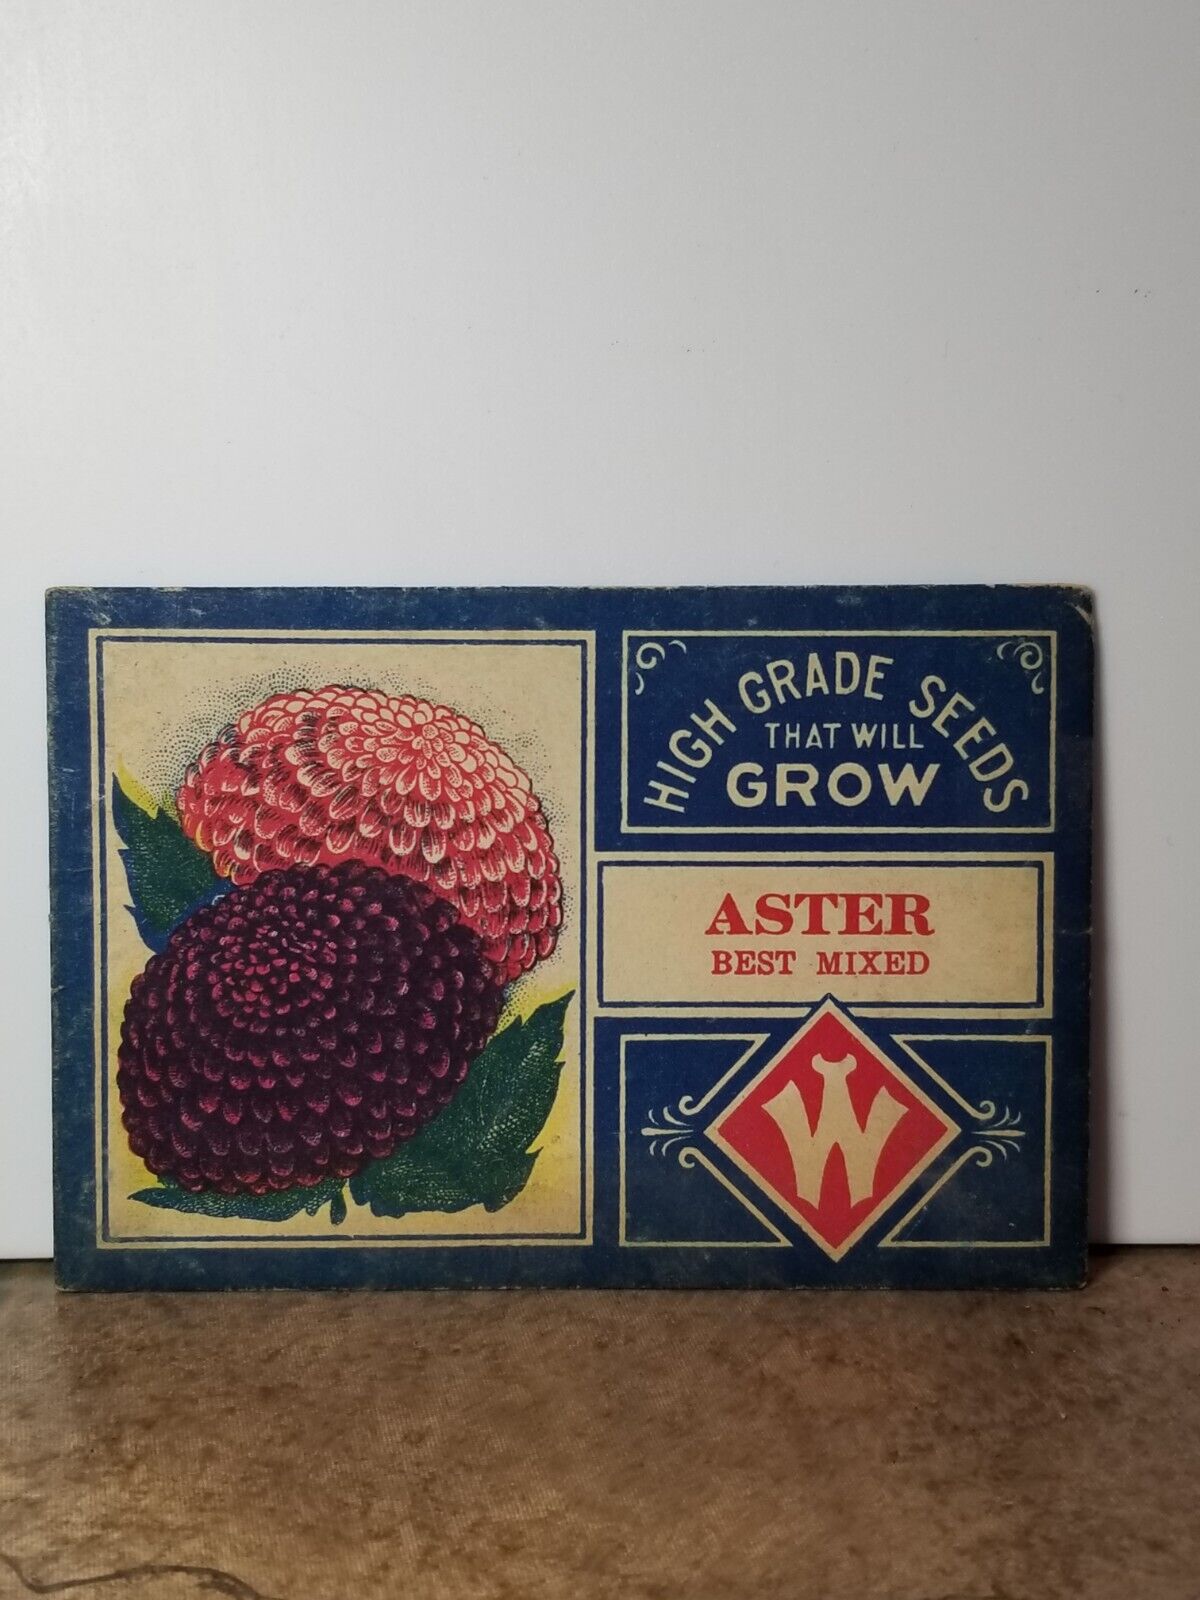 Vintage FLOWER SEED PACKET Aster International Litho Co Roch NY with SEEDS 1920